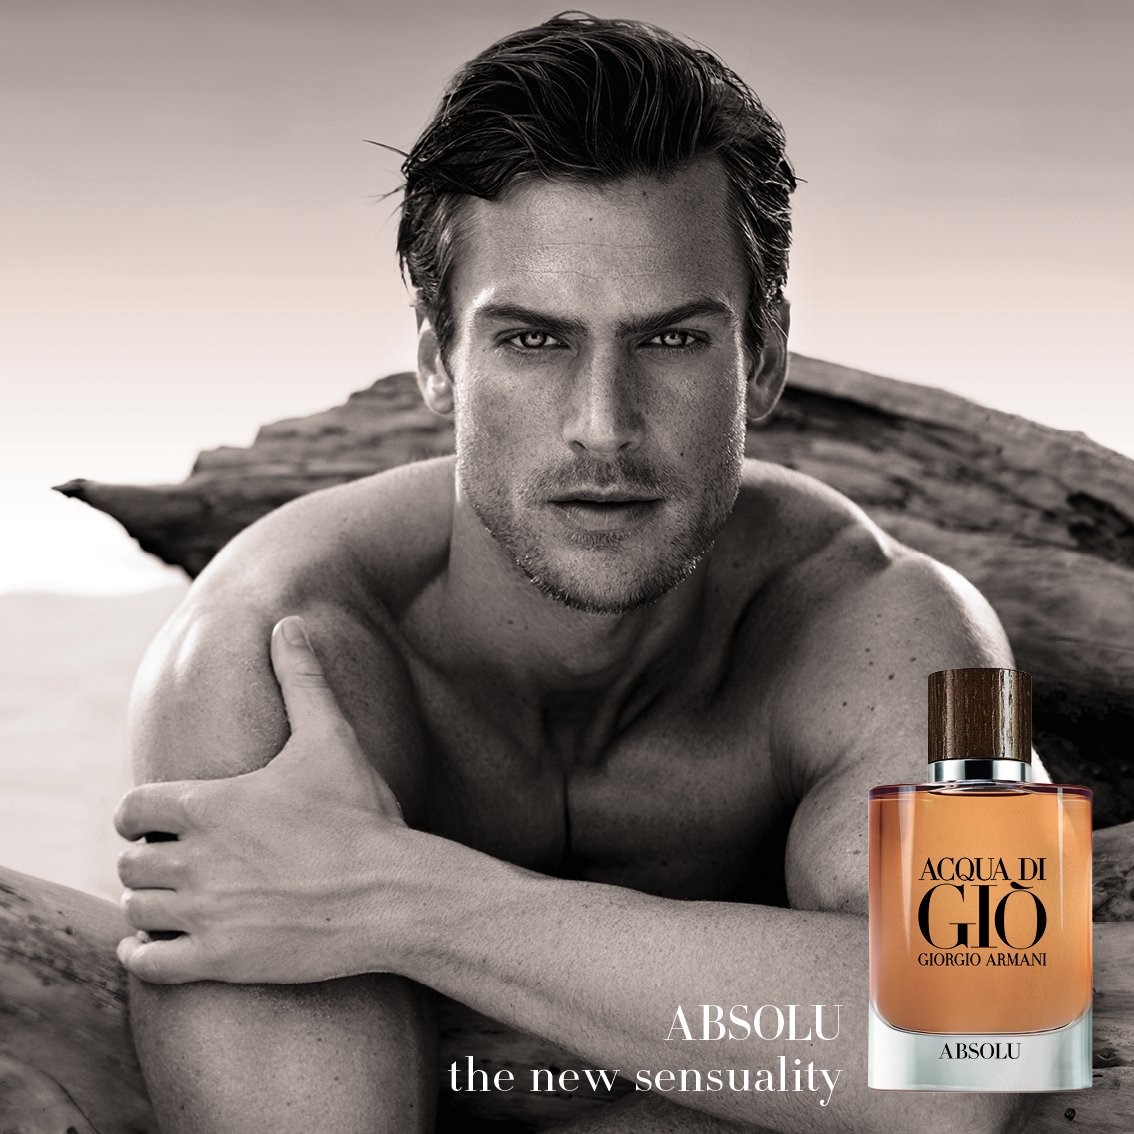 CoqCreative power by ProductionLink s.r.l. Acqua-Di-Gio-Armani Acqua-Di-Gio-Armani  Acqua-Di-Gio-Armani